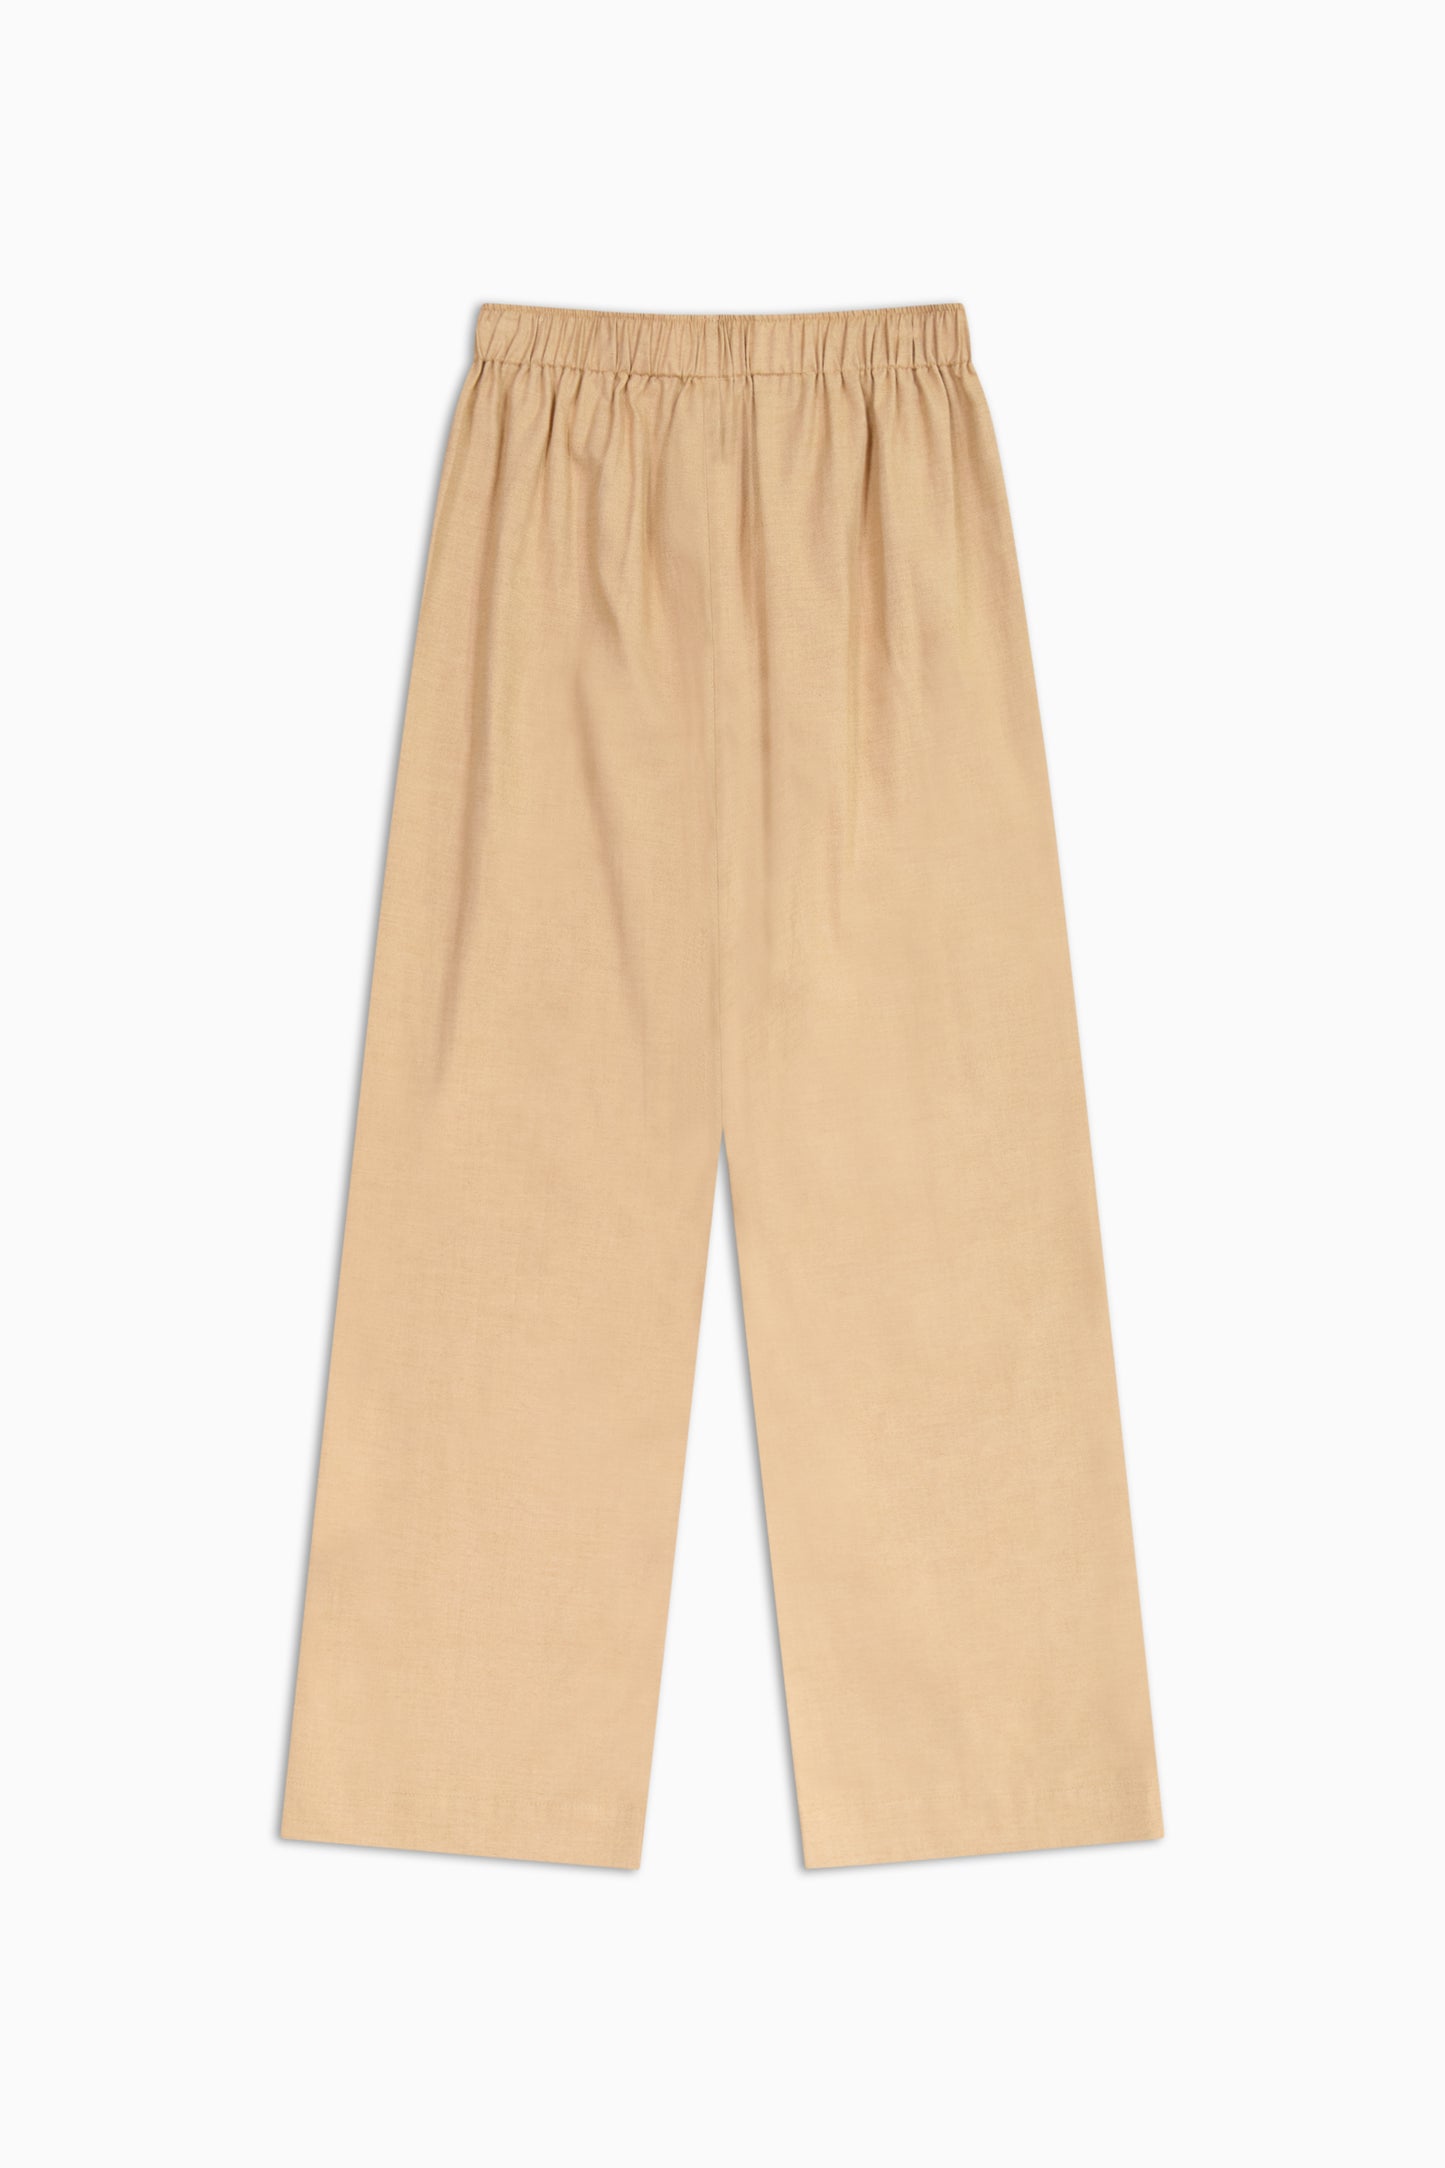 Flannel Lounge Pant - Camel Twill